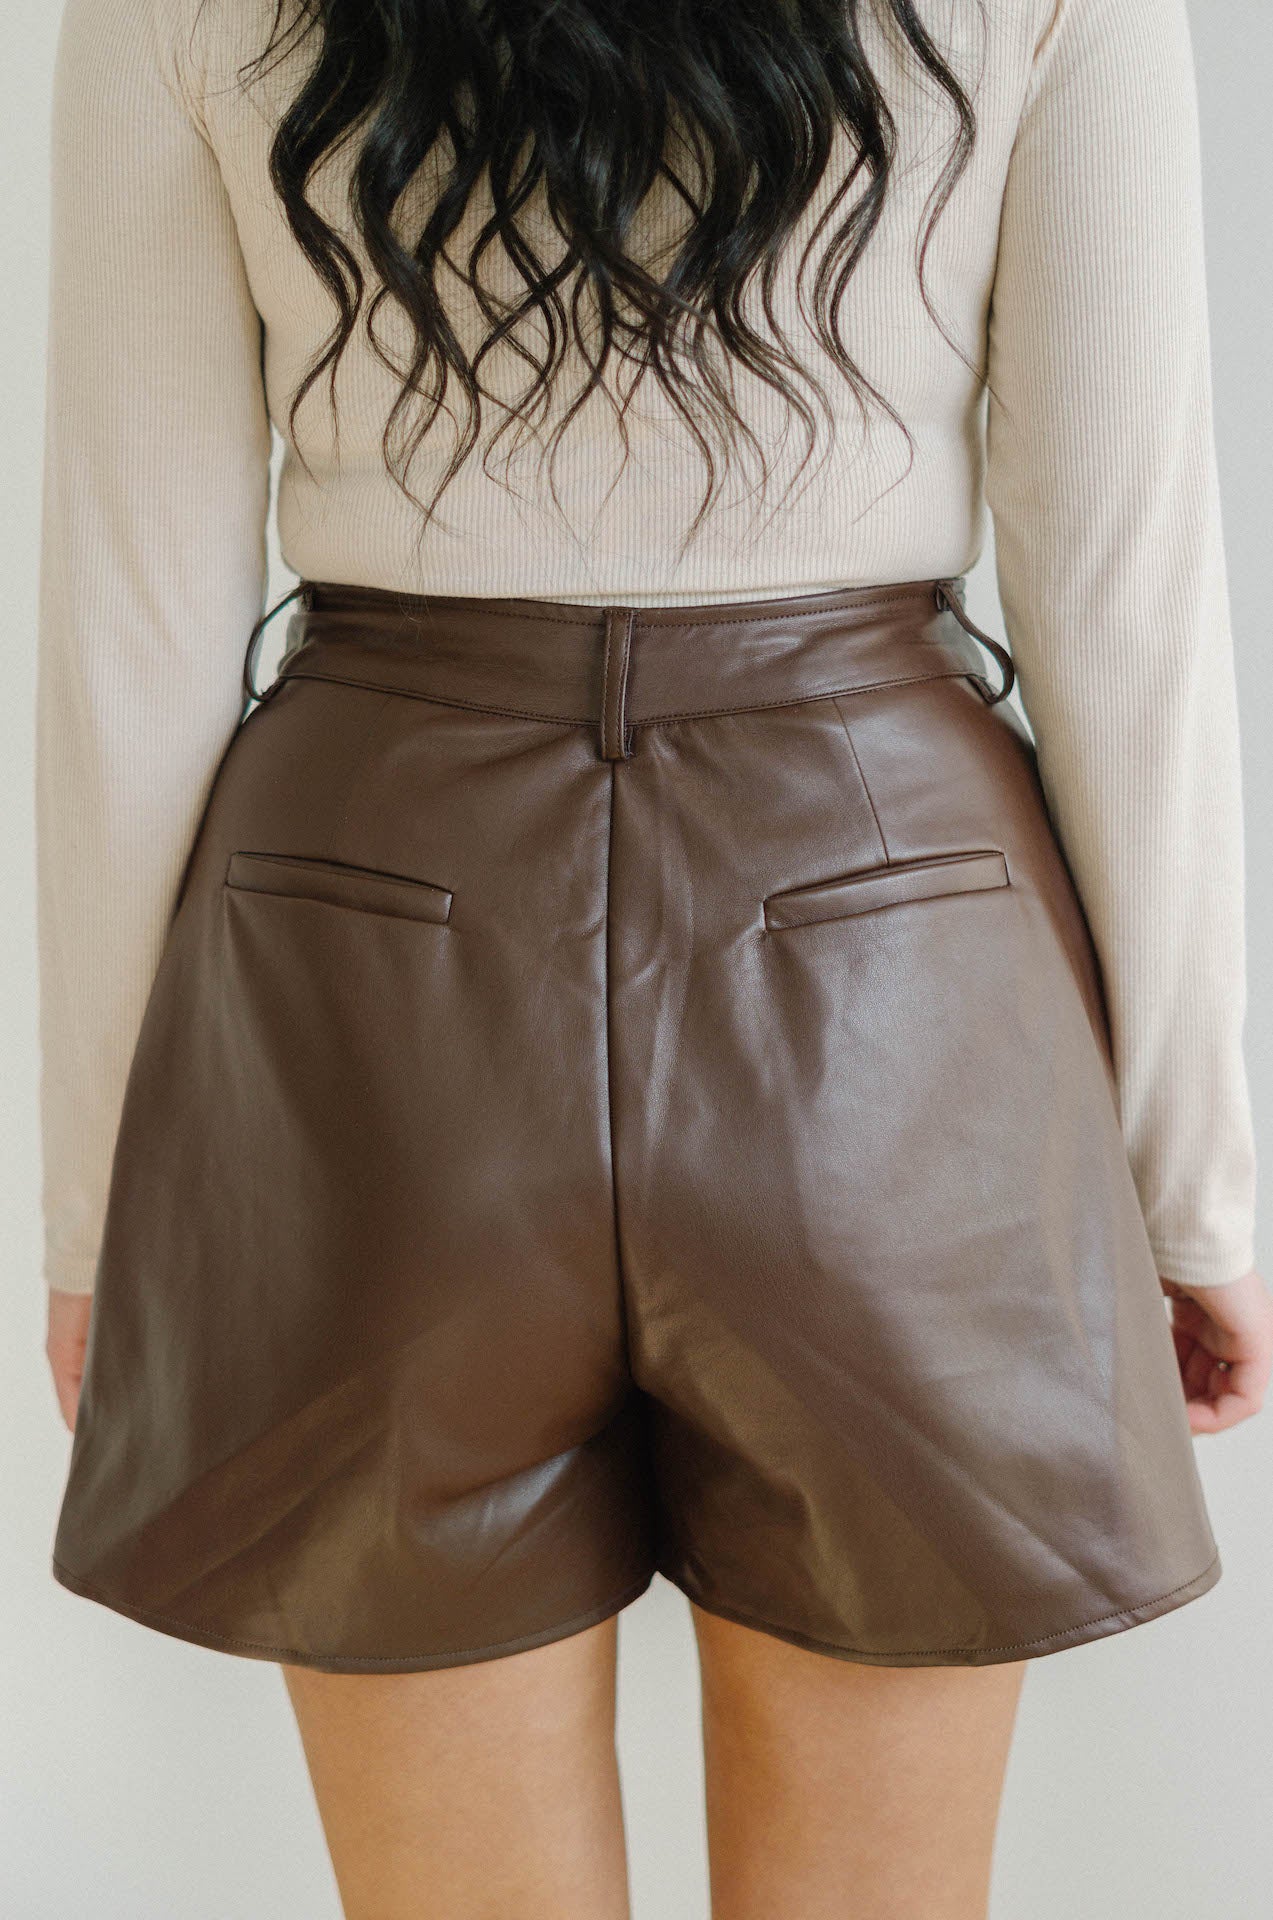 Romie Brown Vegan Leather High Waisted Shorts